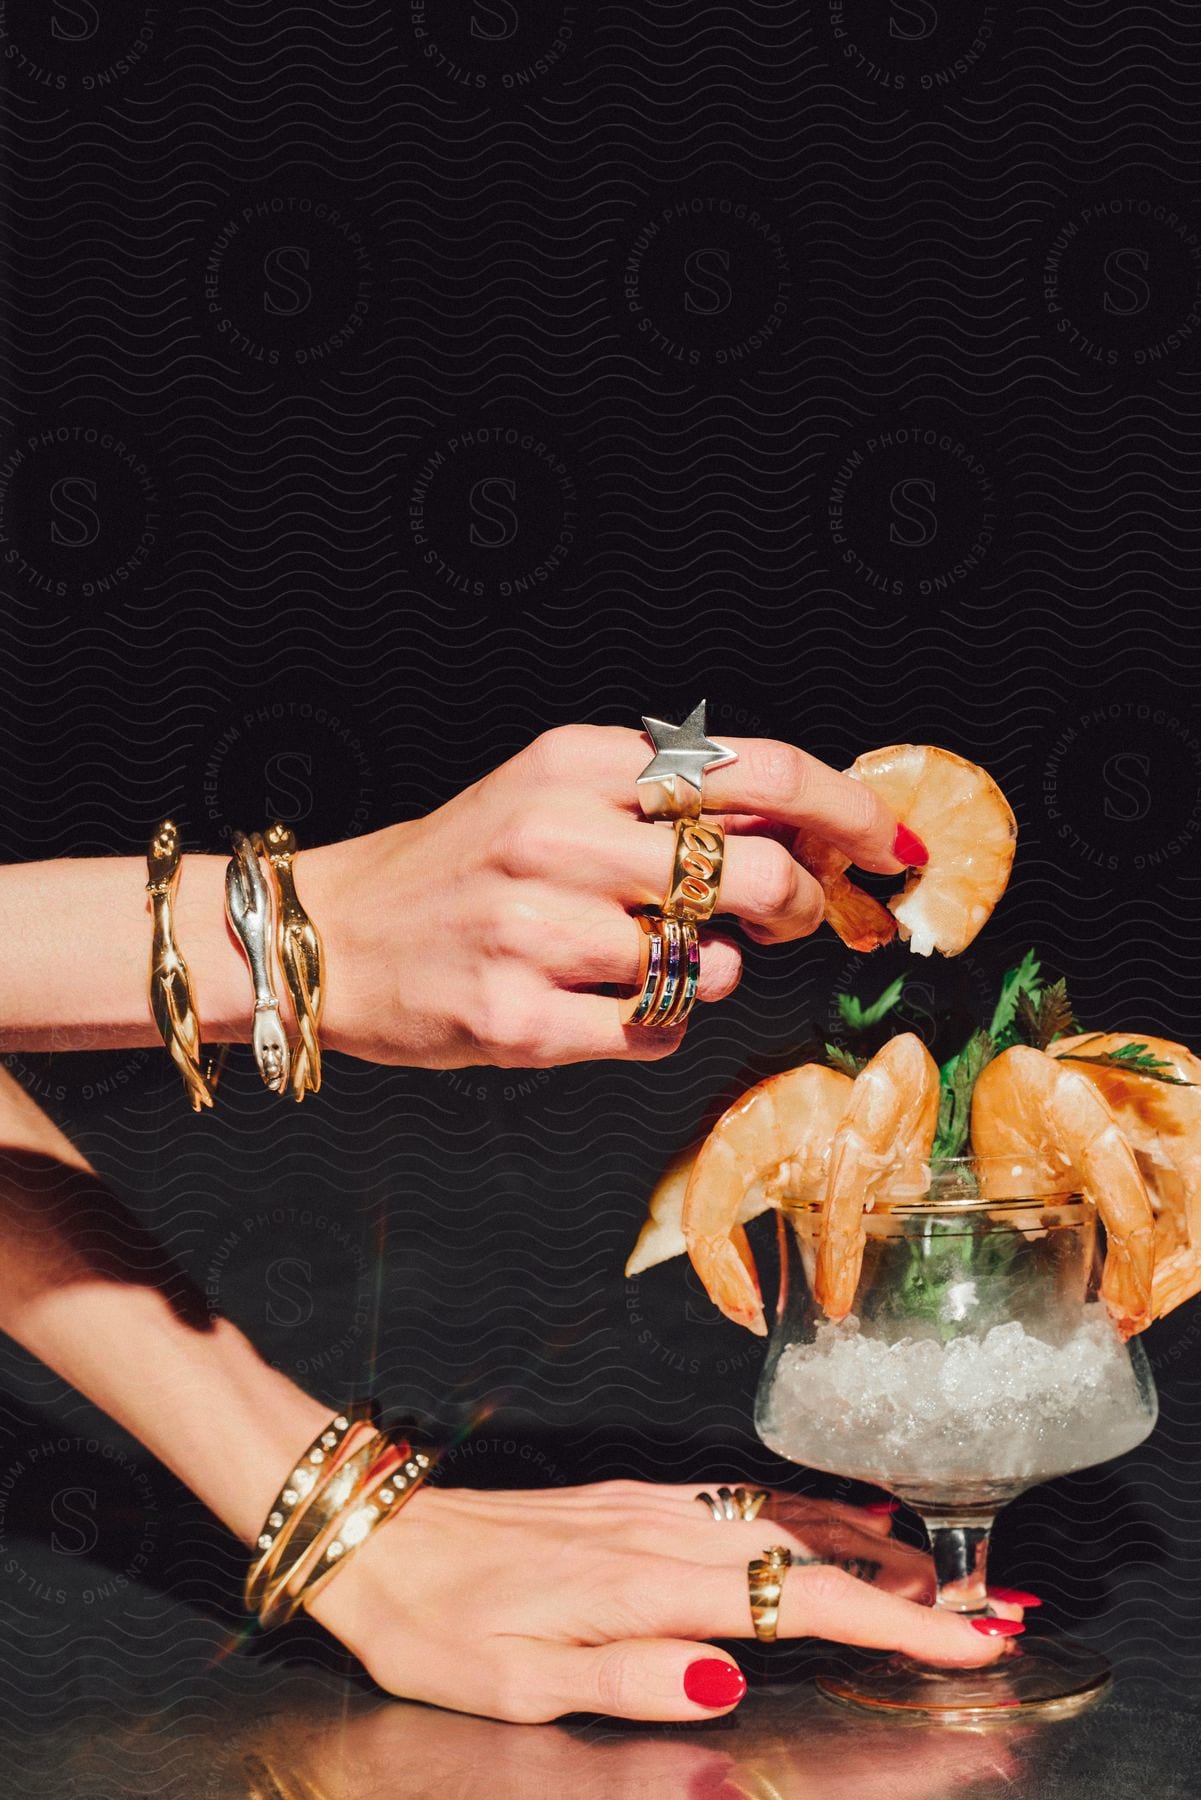 Two hands with various jewels holding a shrimp in a glass filled with ice.